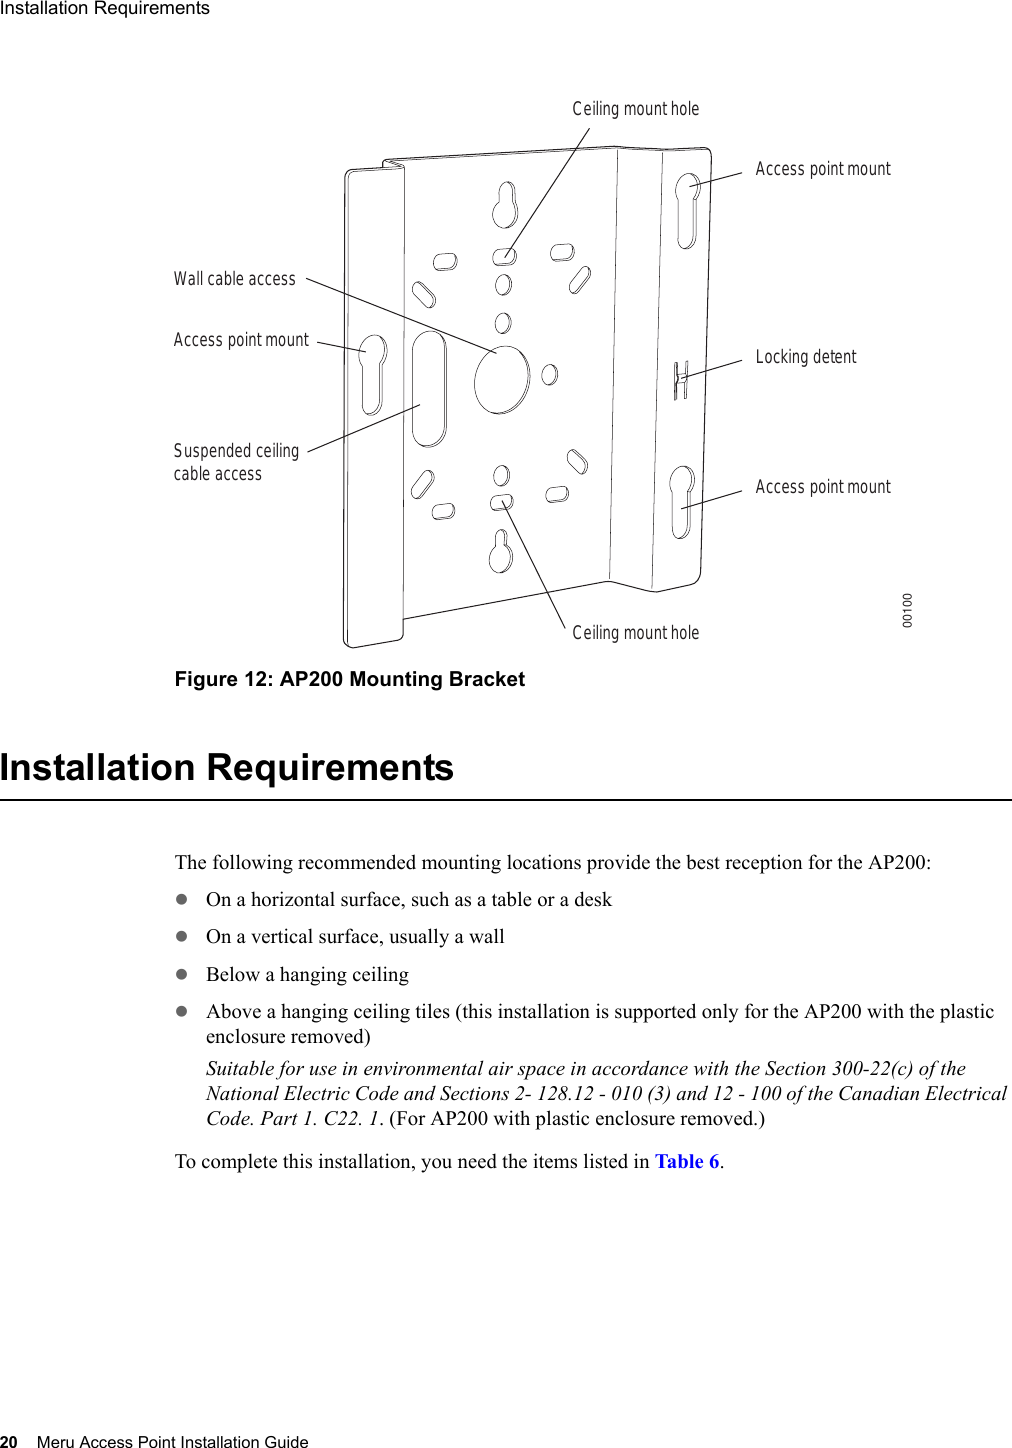 20 Meru Access Point Installation GuideInstallation Requirements Figure 12: AP200 Mounting BracketInstallation RequirementsThe following recommended mounting locations provide the best reception for the AP200:zOn a horizontal surface, such as a table or a deskzOn a vertical surface, usually a wallzBelow a hanging ceilingzAbove a hanging ceiling tiles (this installation is supported only for the AP200 with the plastic enclosure removed)Suitable for use in environmental air space in accordance with the Section 300-22(c) of the National Electric Code and Sections 2- 128.12 - 010 (3) and 12 - 100 of the Canadian Electrical Code. Part 1. C22. 1. (For AP200 with plastic enclosure removed.)To complete this installation, you need the items listed in Table 6.Access point mountCeiling mount holeCeiling mount holeAccess point mountAccess point mountLocking detentWall cable accessSuspended ceilingcable access00100